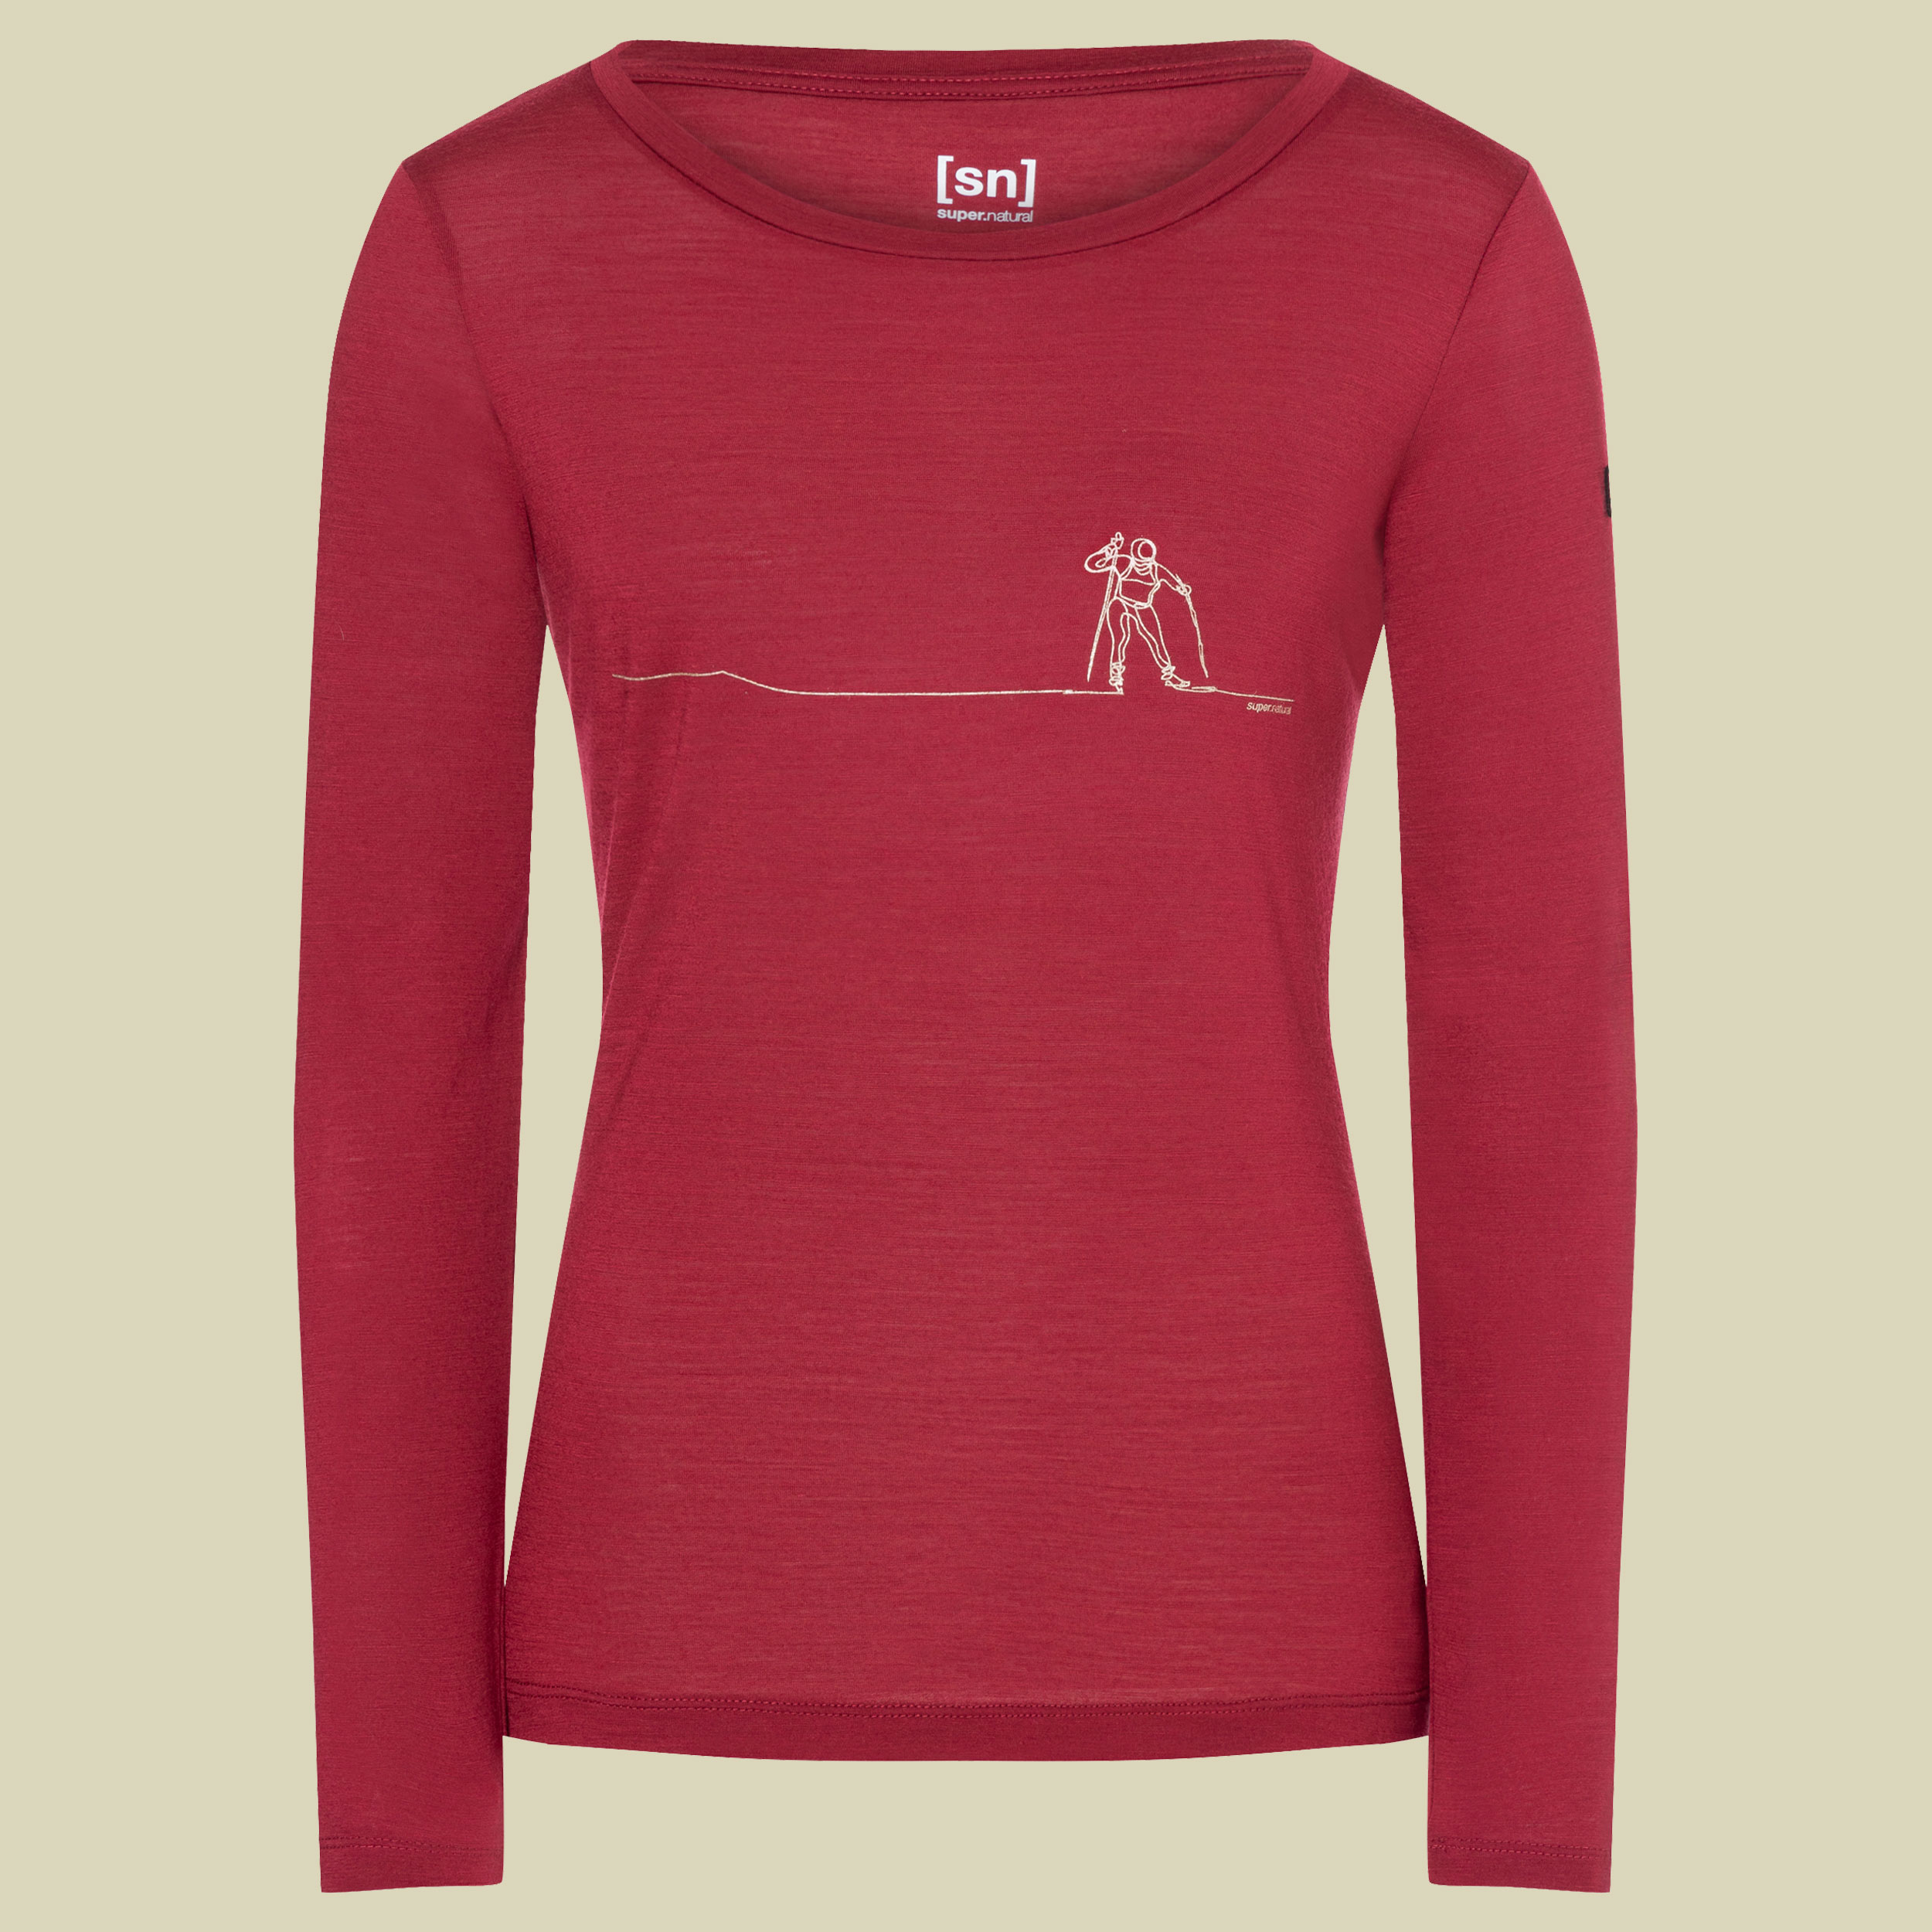 Cross Country LS Women Größe M  Farbe rumba red/gold